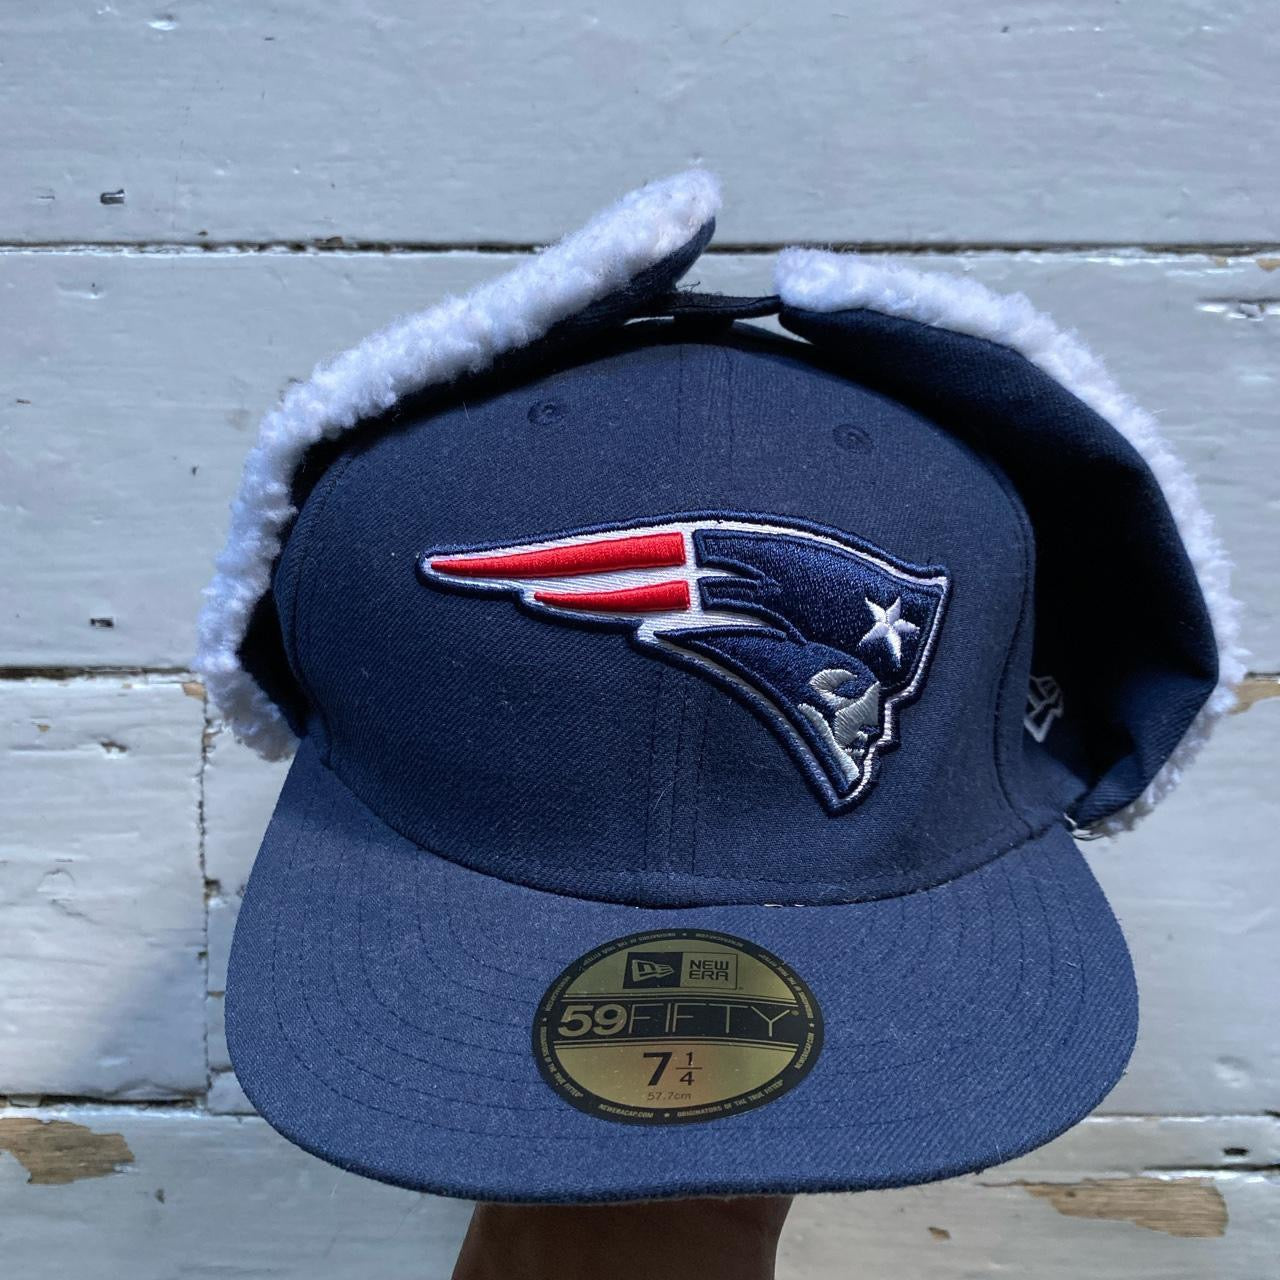 New England Patriots Dog Ear Fitted Cap (Size 7 1/4)